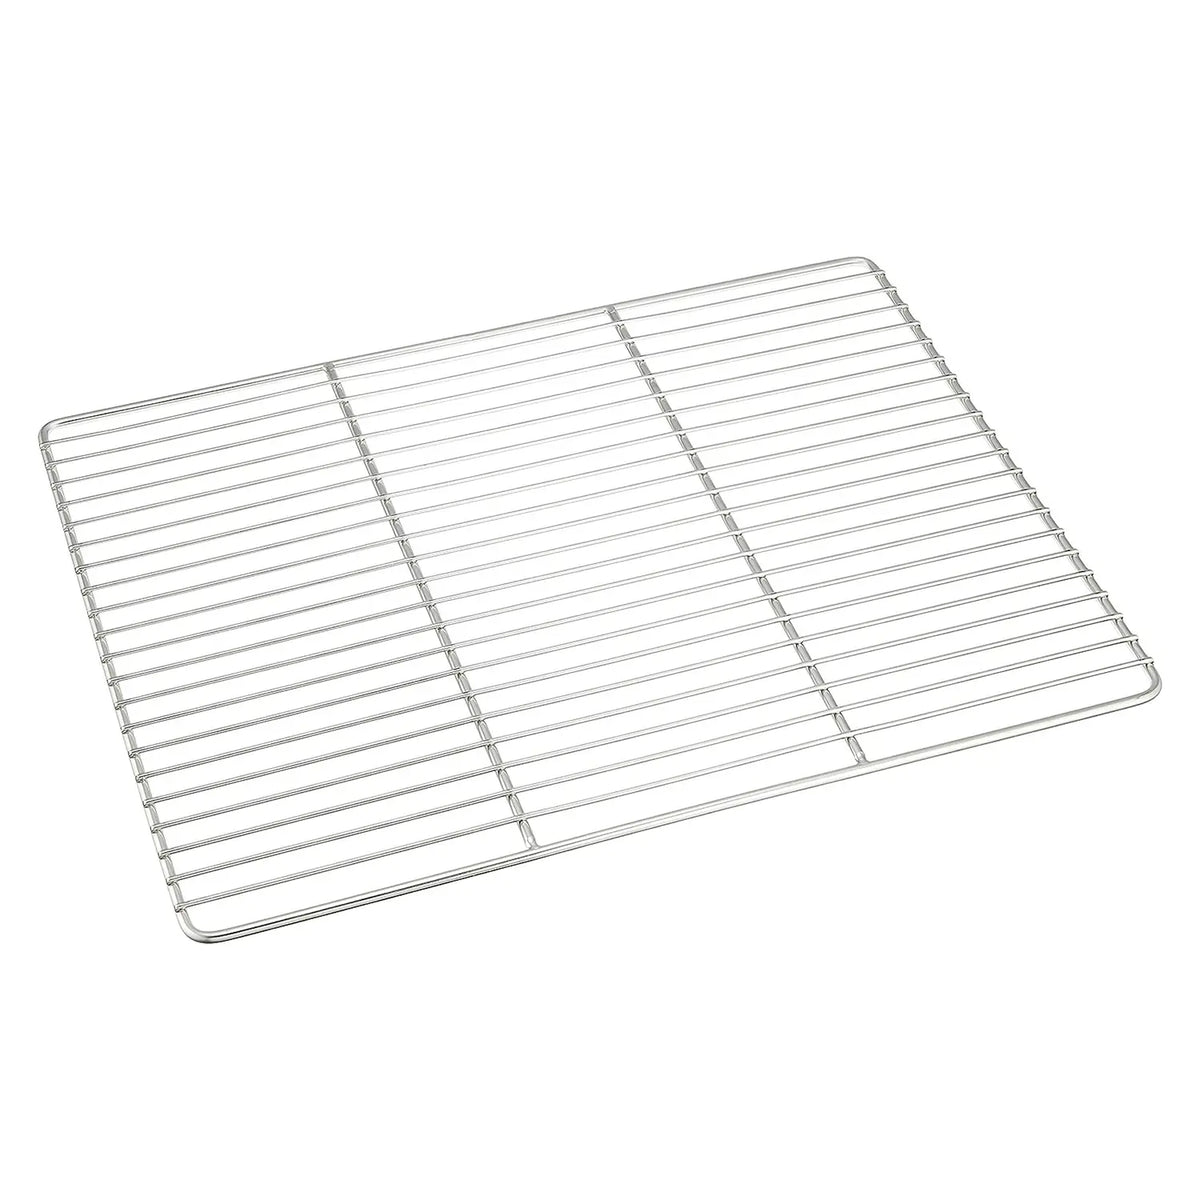 EBM Stainless Steel Square Cake Cooling Rack